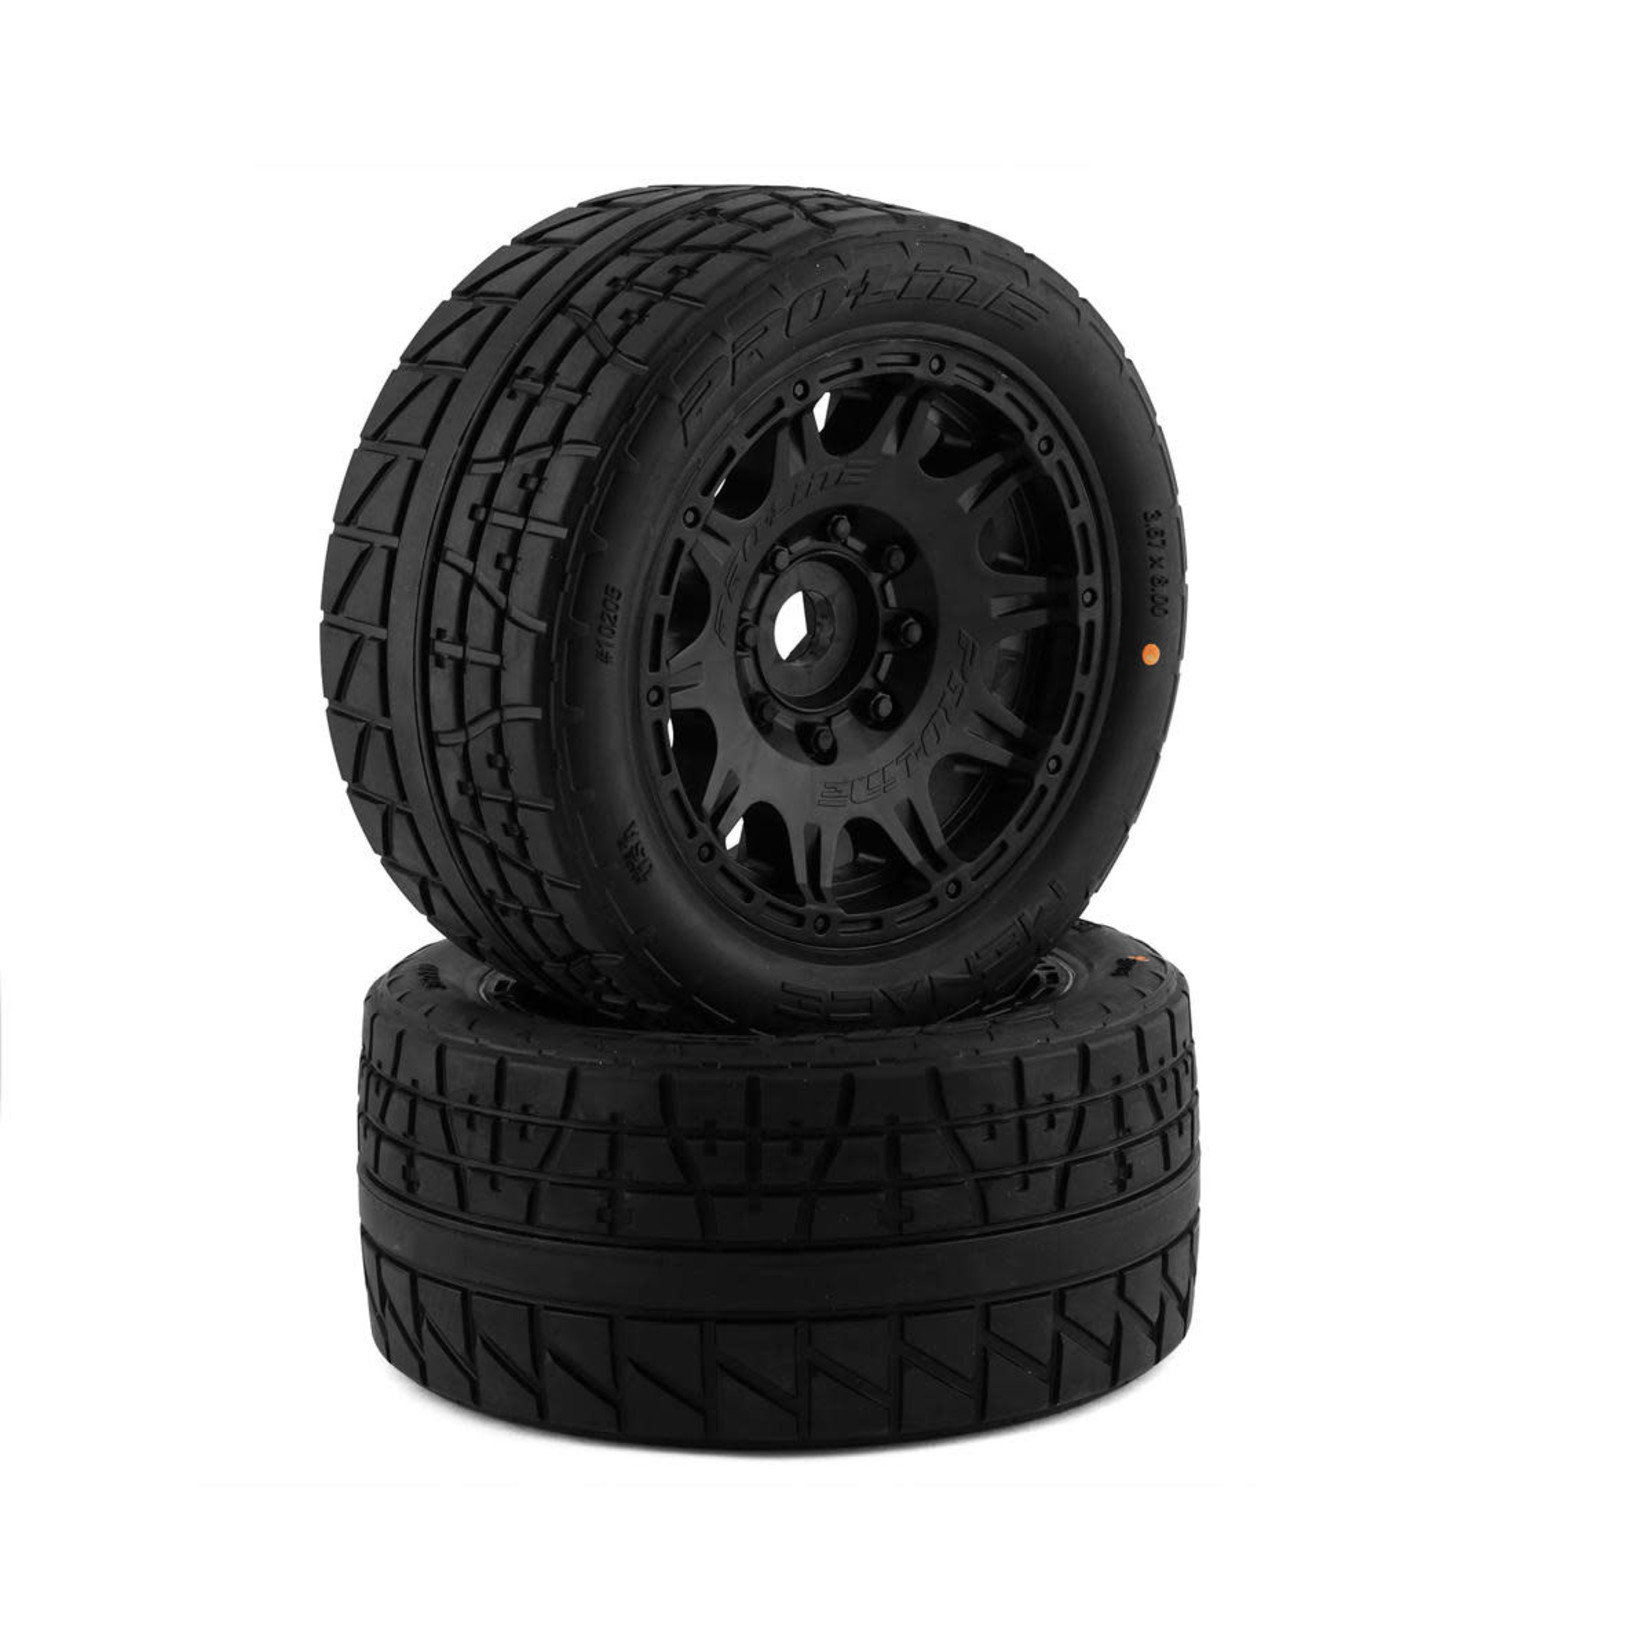 Pro-Line Pro-Line 1/6 Menace HP Belted Pre-Mounted 8S Monster Truck Tire (Black) (2) (G8) w/24mm Hex #10205-10